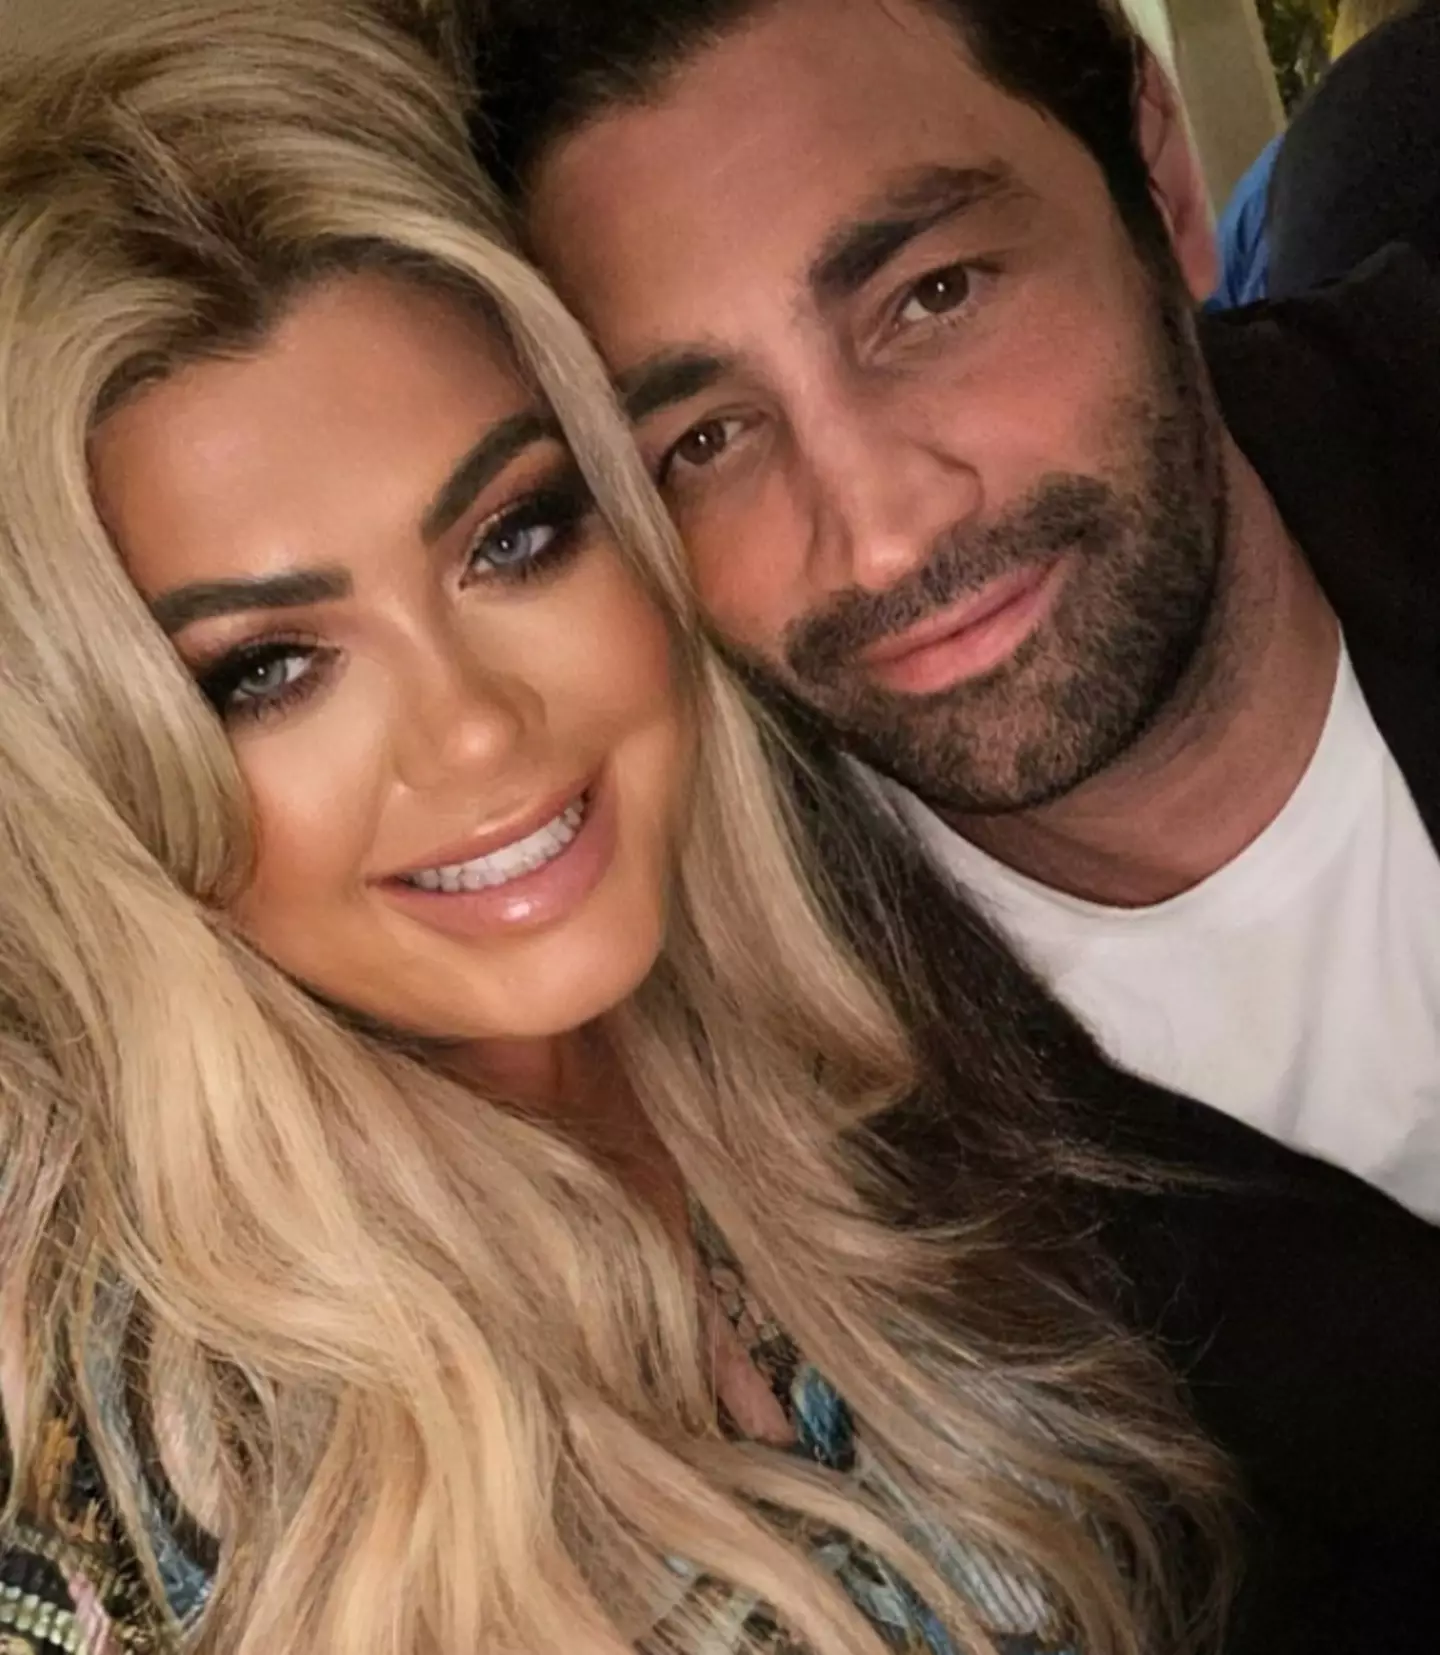 Gemma Collins announced she was holding off on marrying just yet.